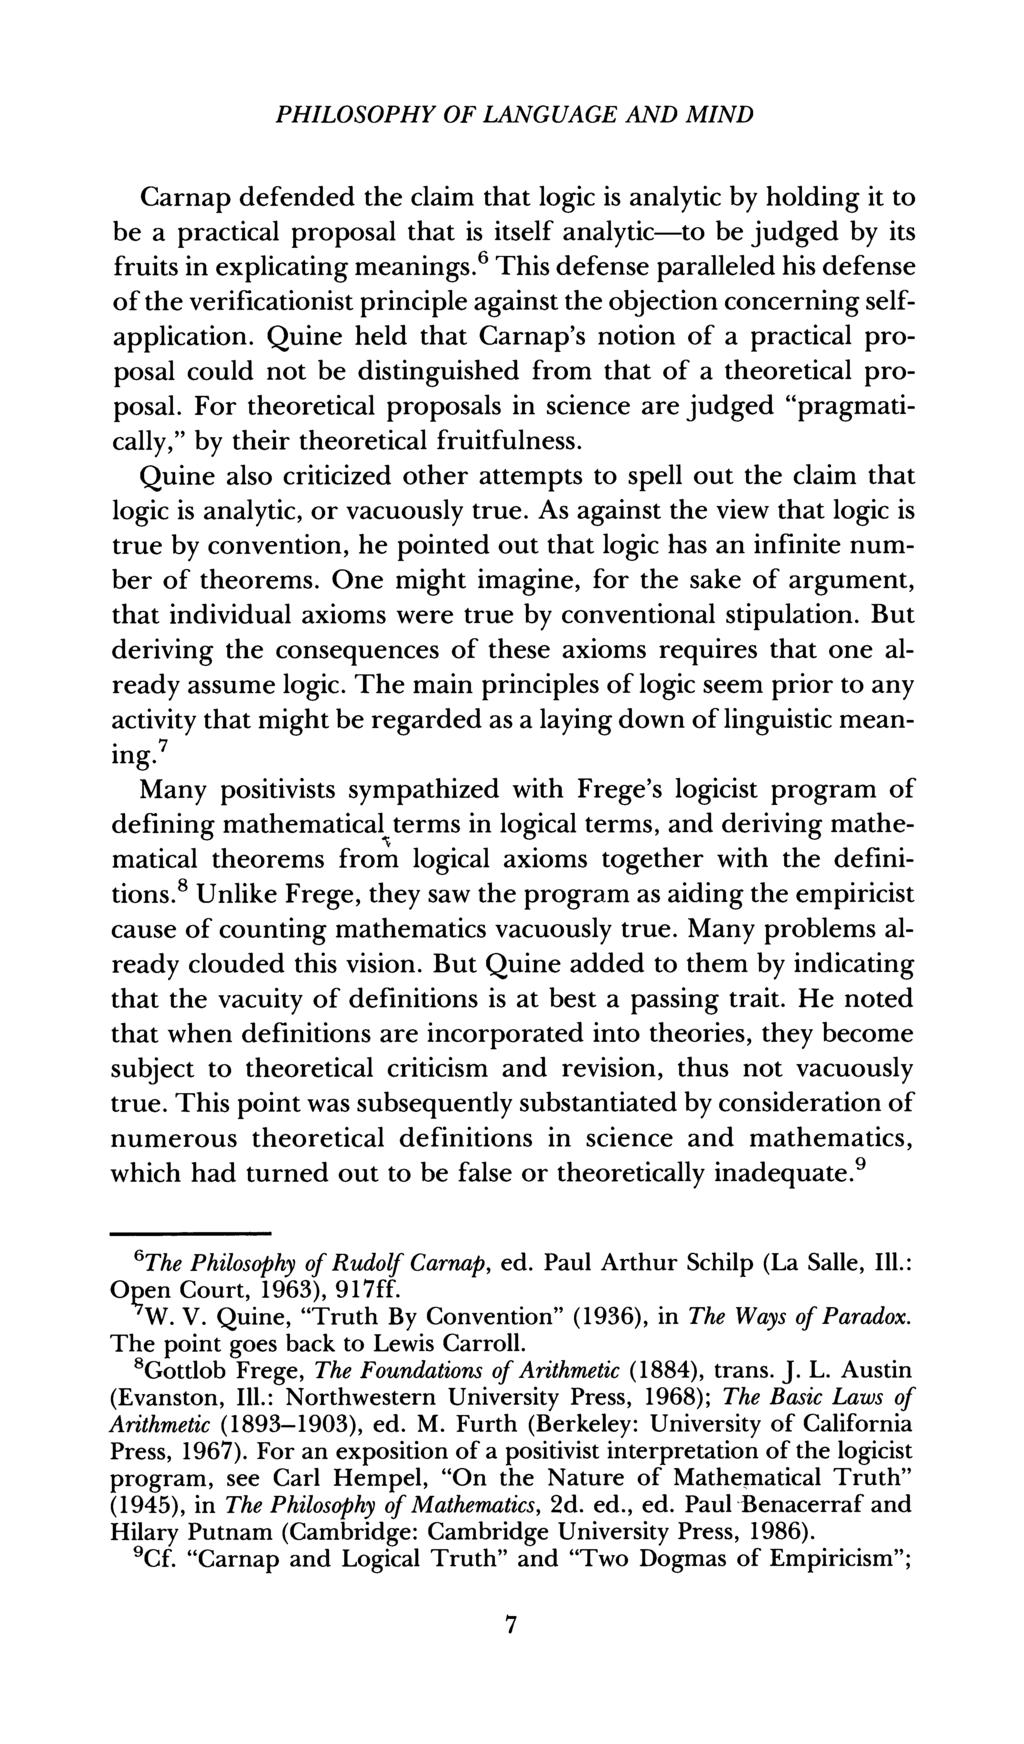 PHILOSOPHY OF LANGUAGE AND MIND Carnap defended the claim that logic is analytic by holding it to be a practical proposal that is itself analytic-to be judged by its fruits in explicating meanings.